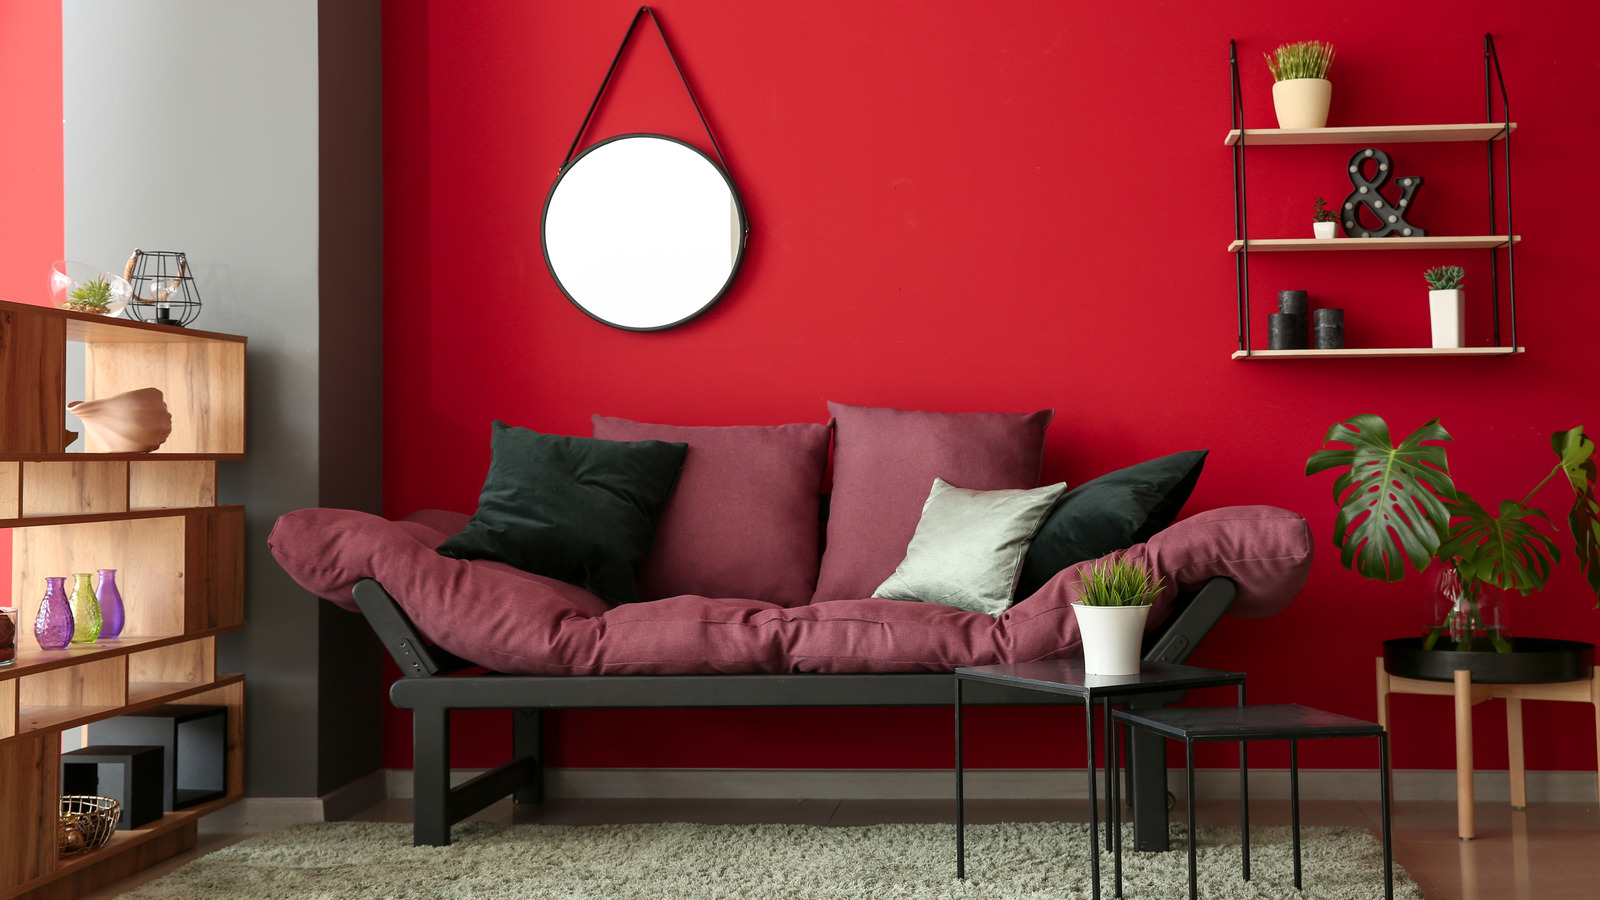 The Best Red Paint Colors, According to Experts